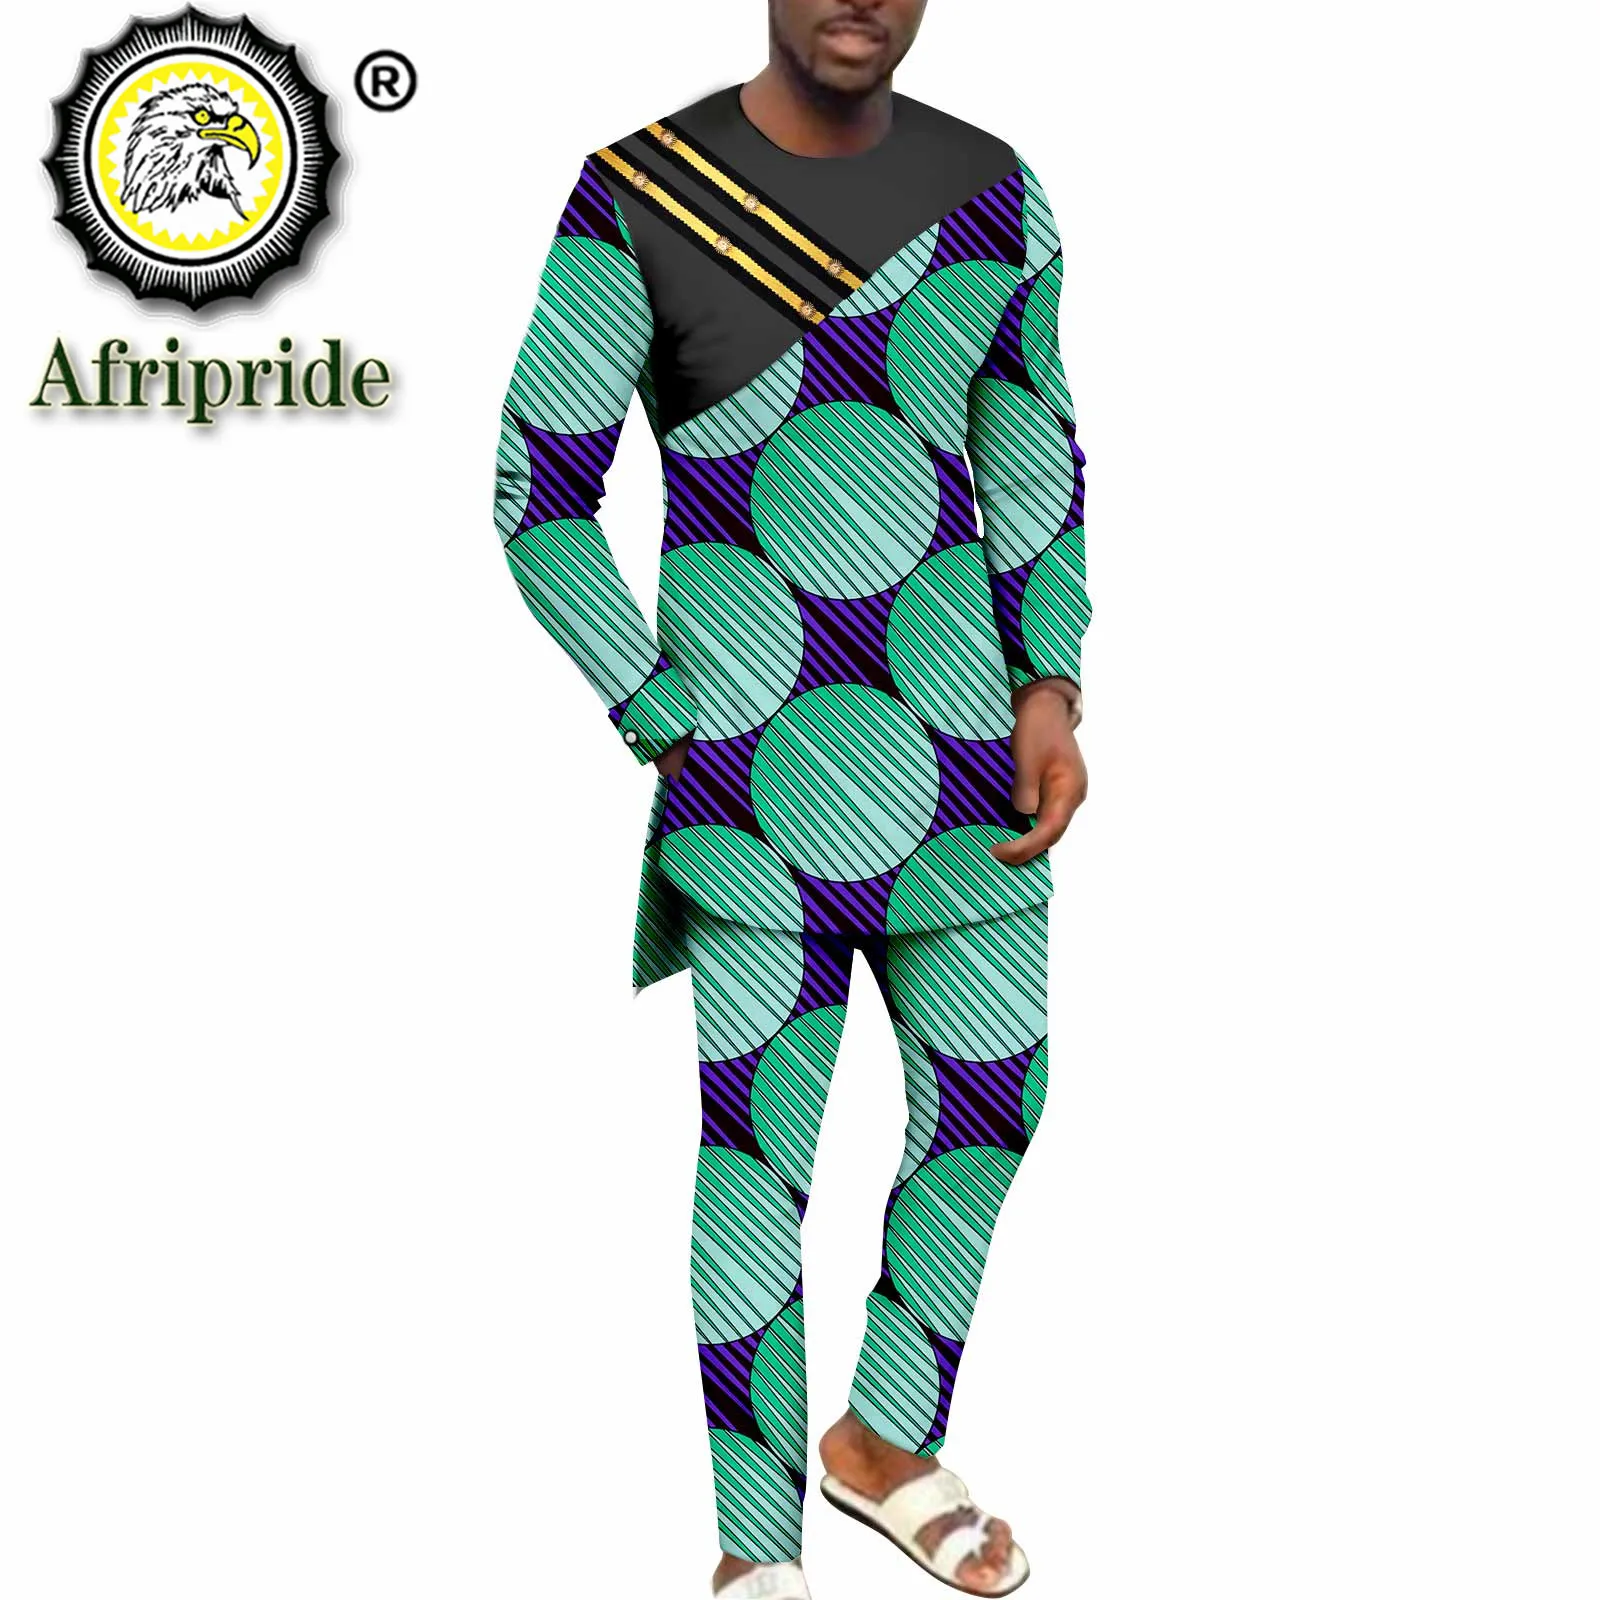 African Men Suits Dashiki Clothing Print Shirts Tops+pants with Pockets 2 Piece Set Ankara Outfits Blouse Plus Size A2116053